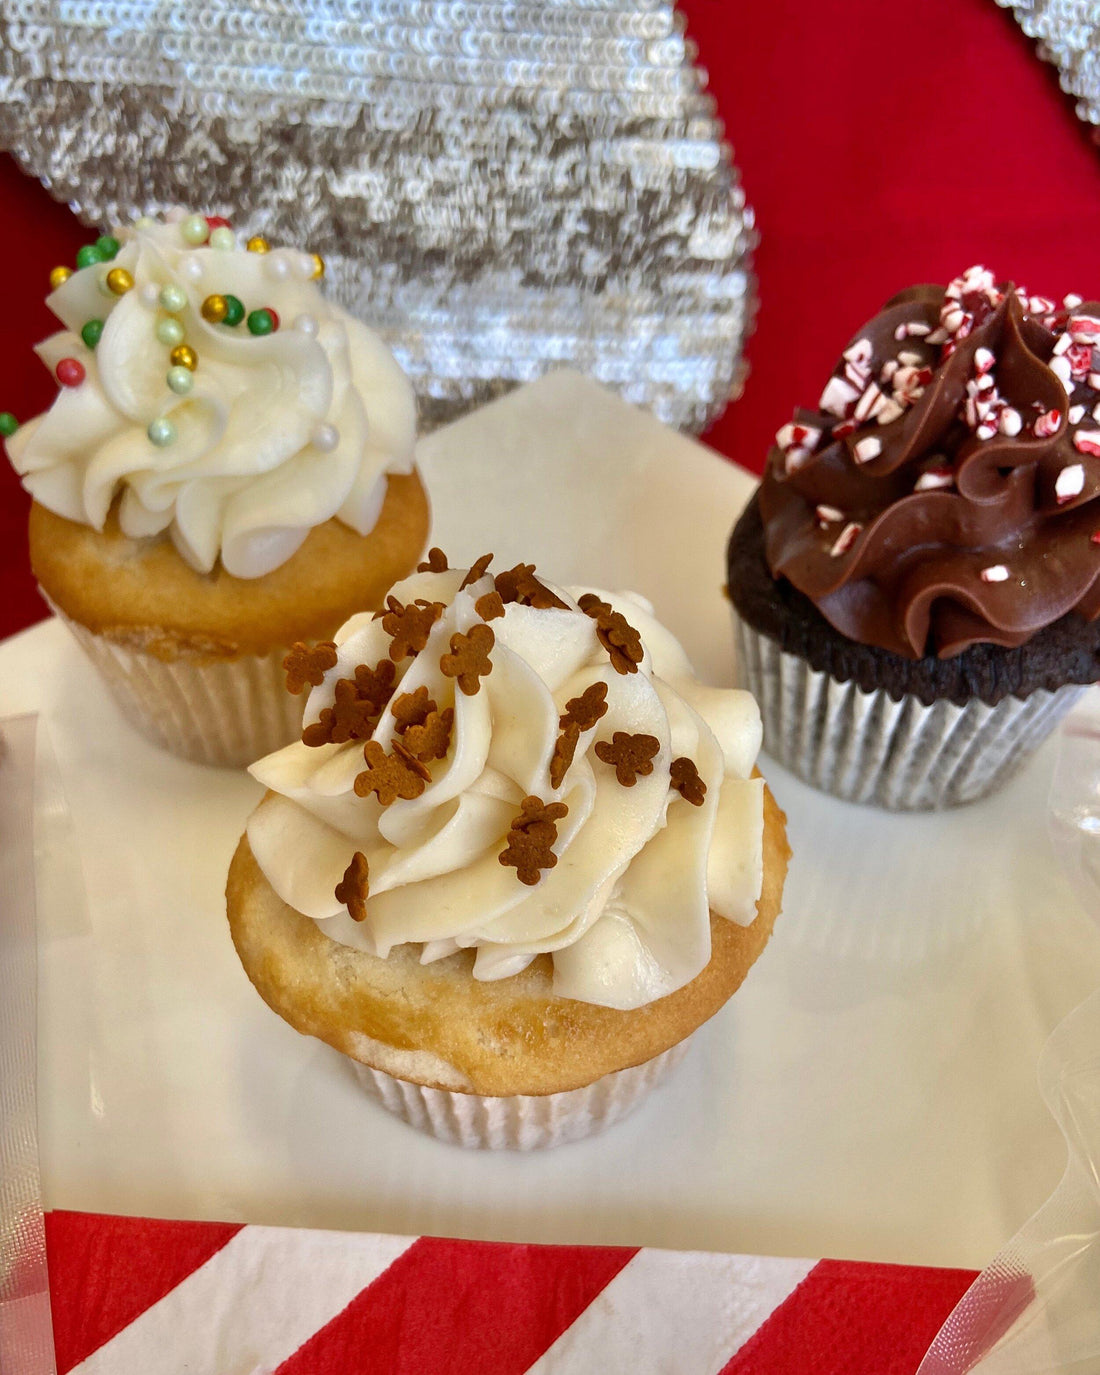 Frosted the Cupcake: It's Christmas in July!